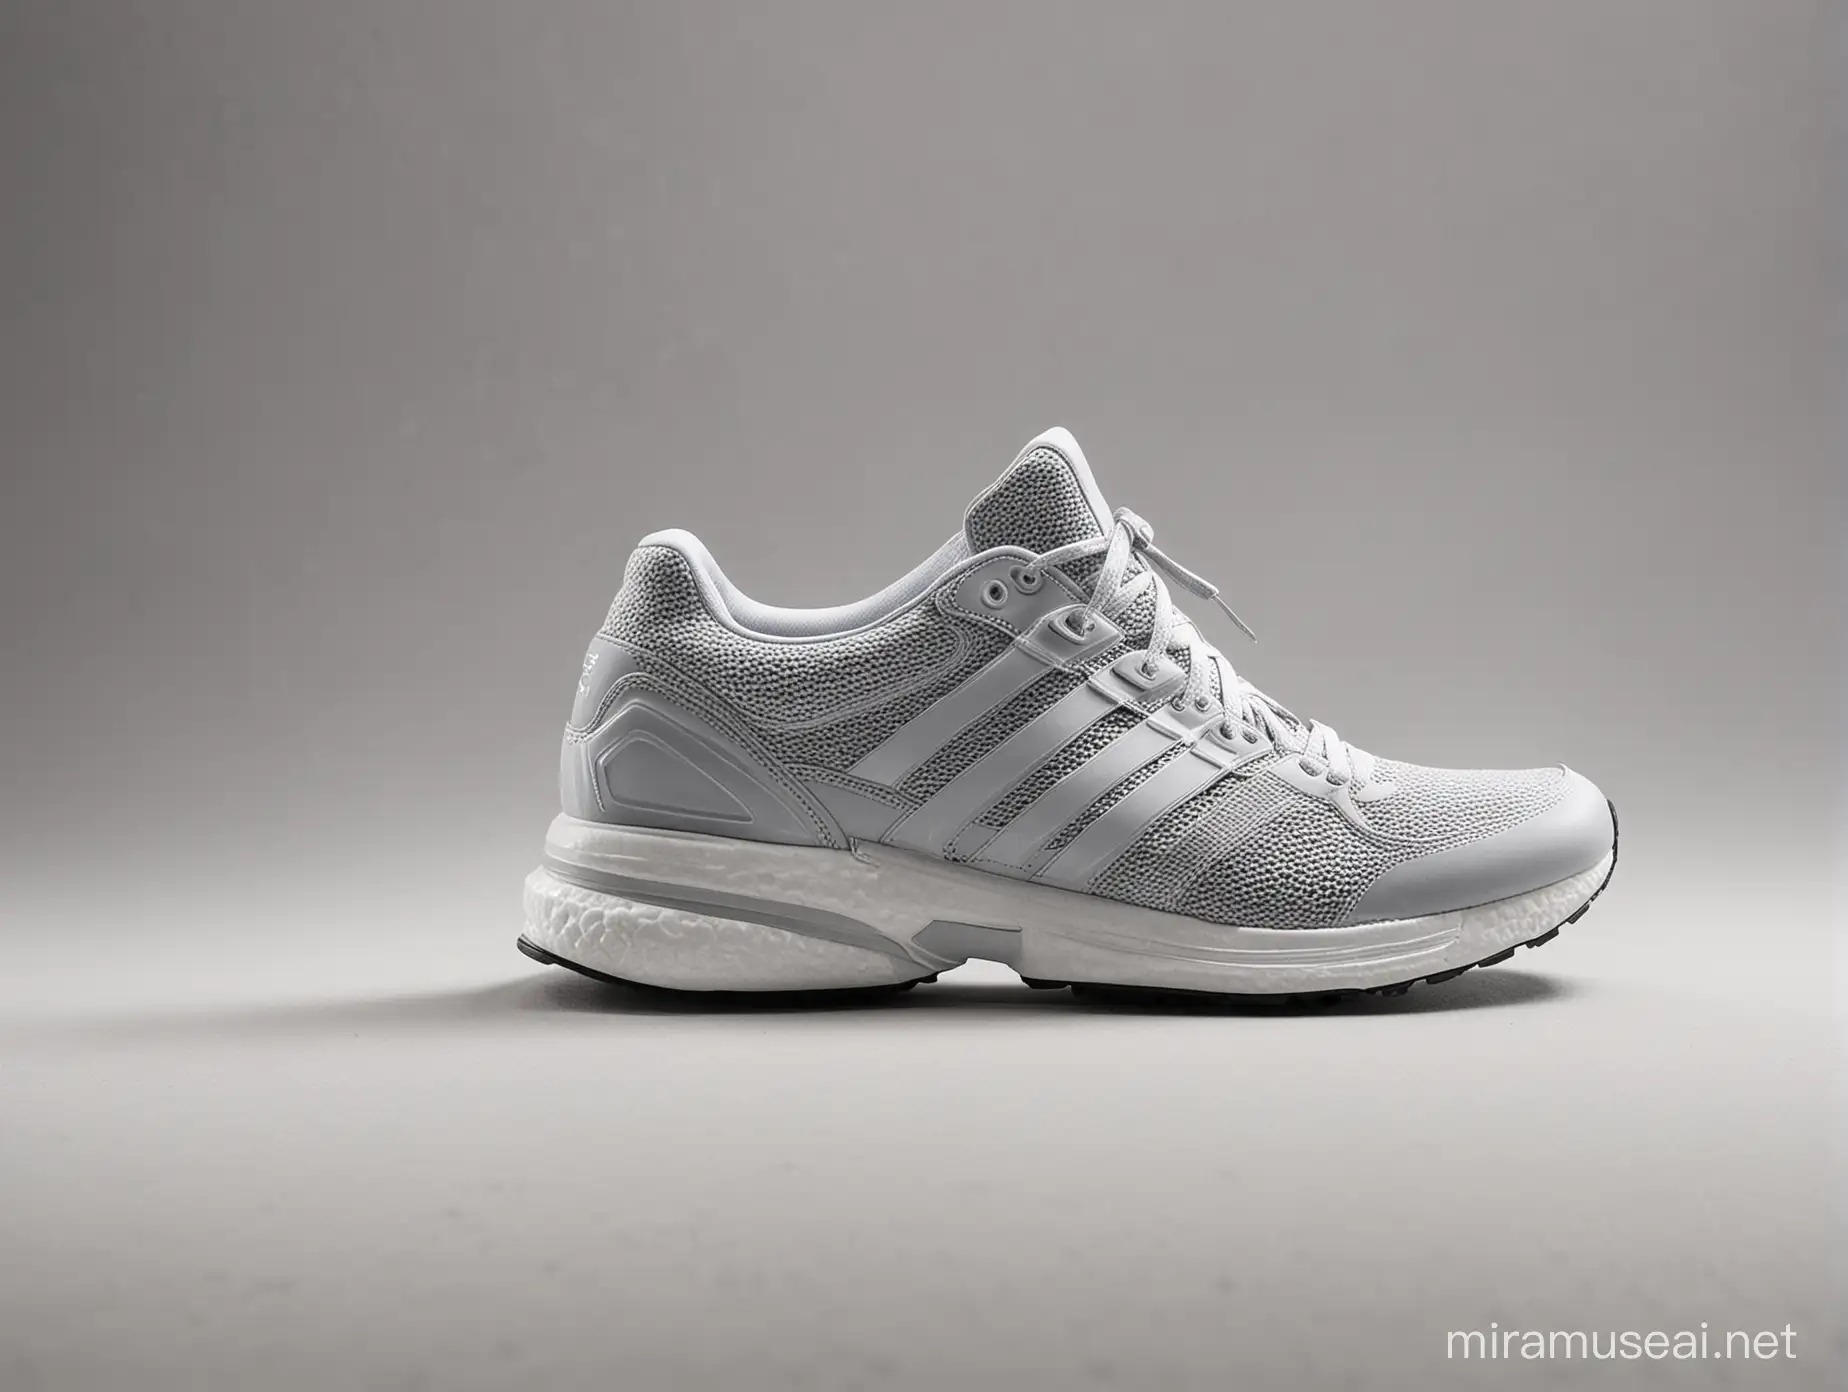 Adidas’ creations Running Shoes and the background is light grey